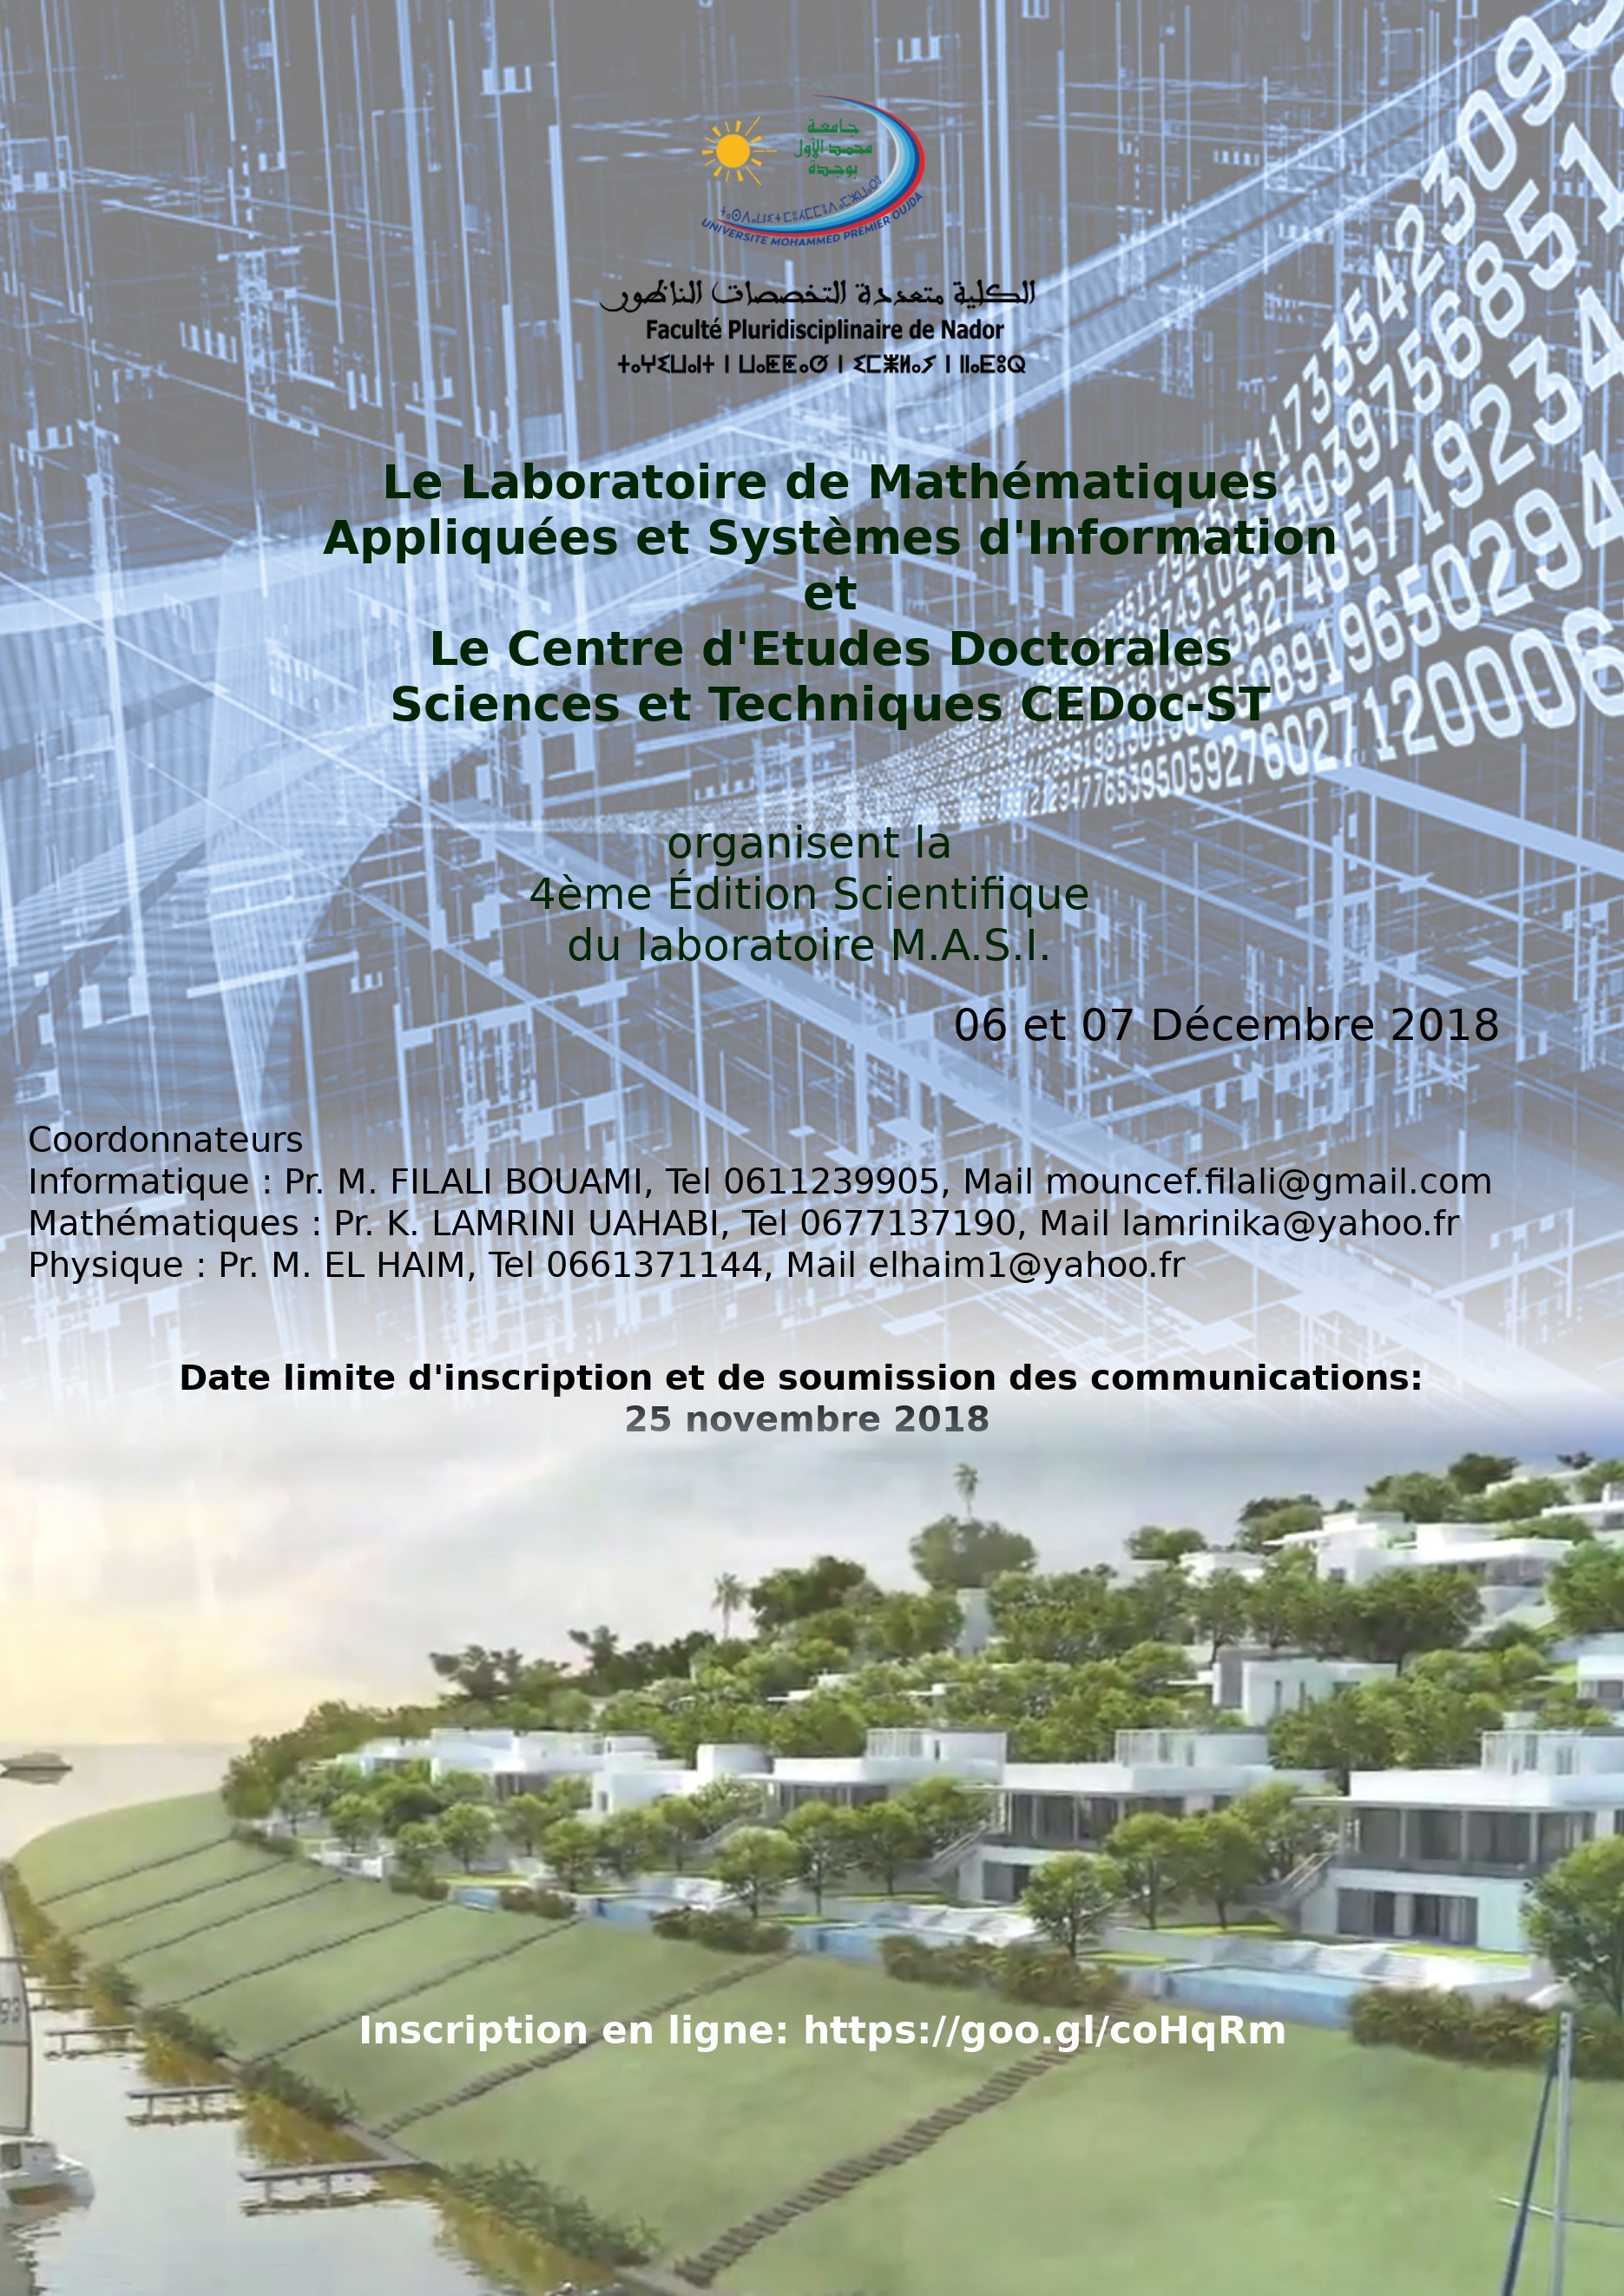 4th Scientific Edition of the MASI laboratory in collaboration with Doctoral Studies Center